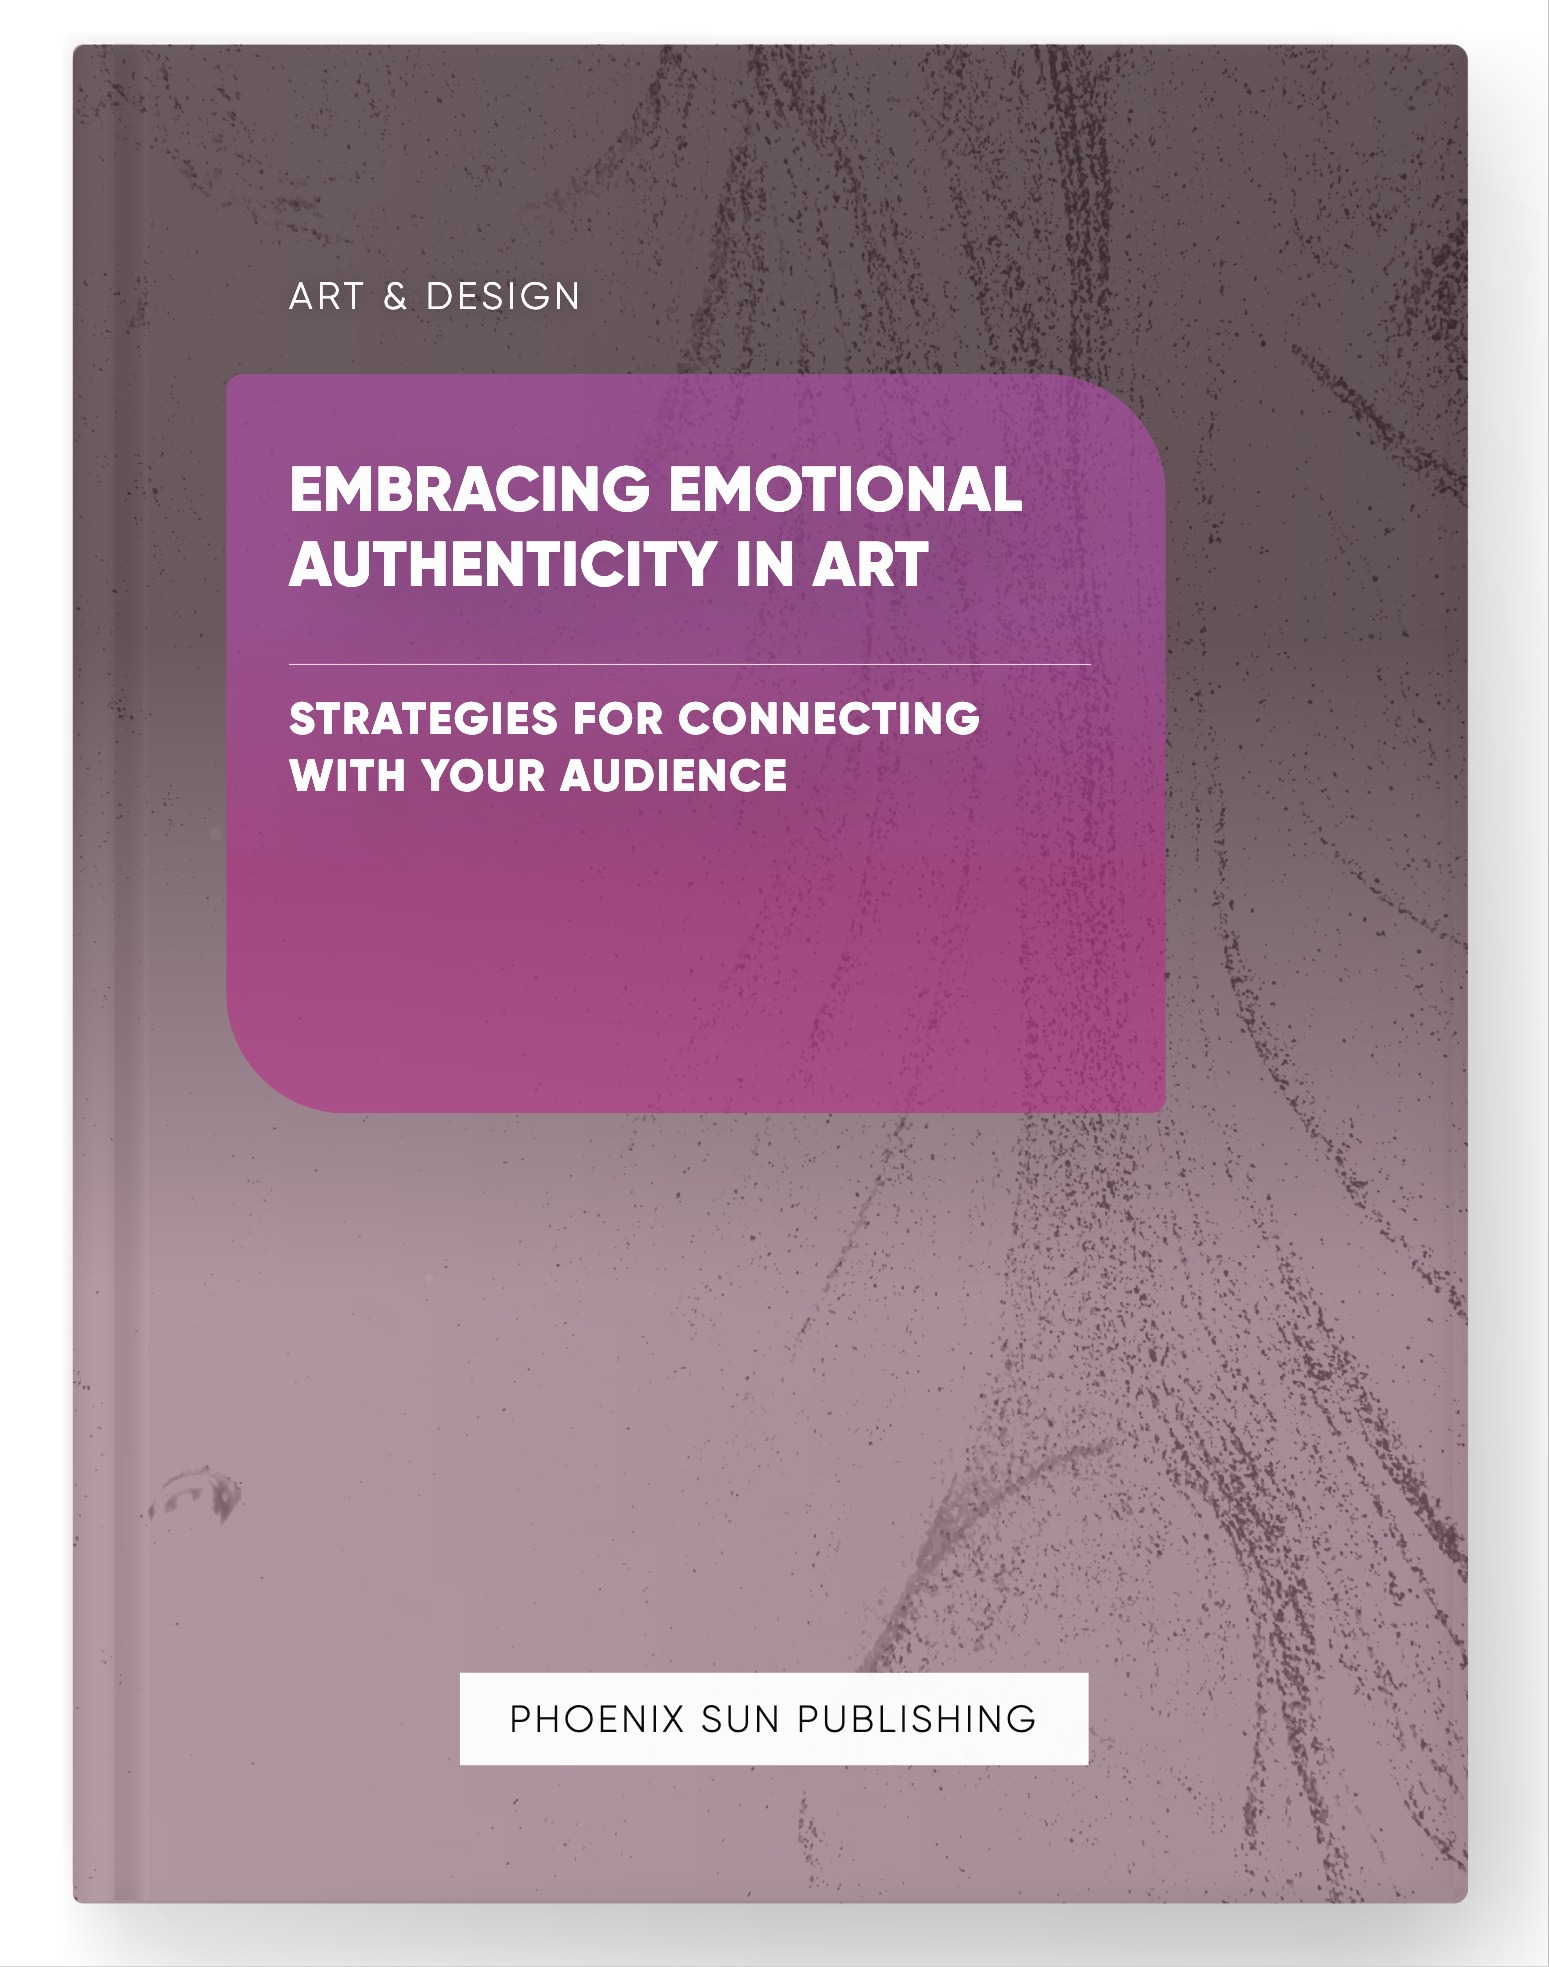 Embracing Emotional Authenticity in Art – Strategies for Connecting with Your Audience